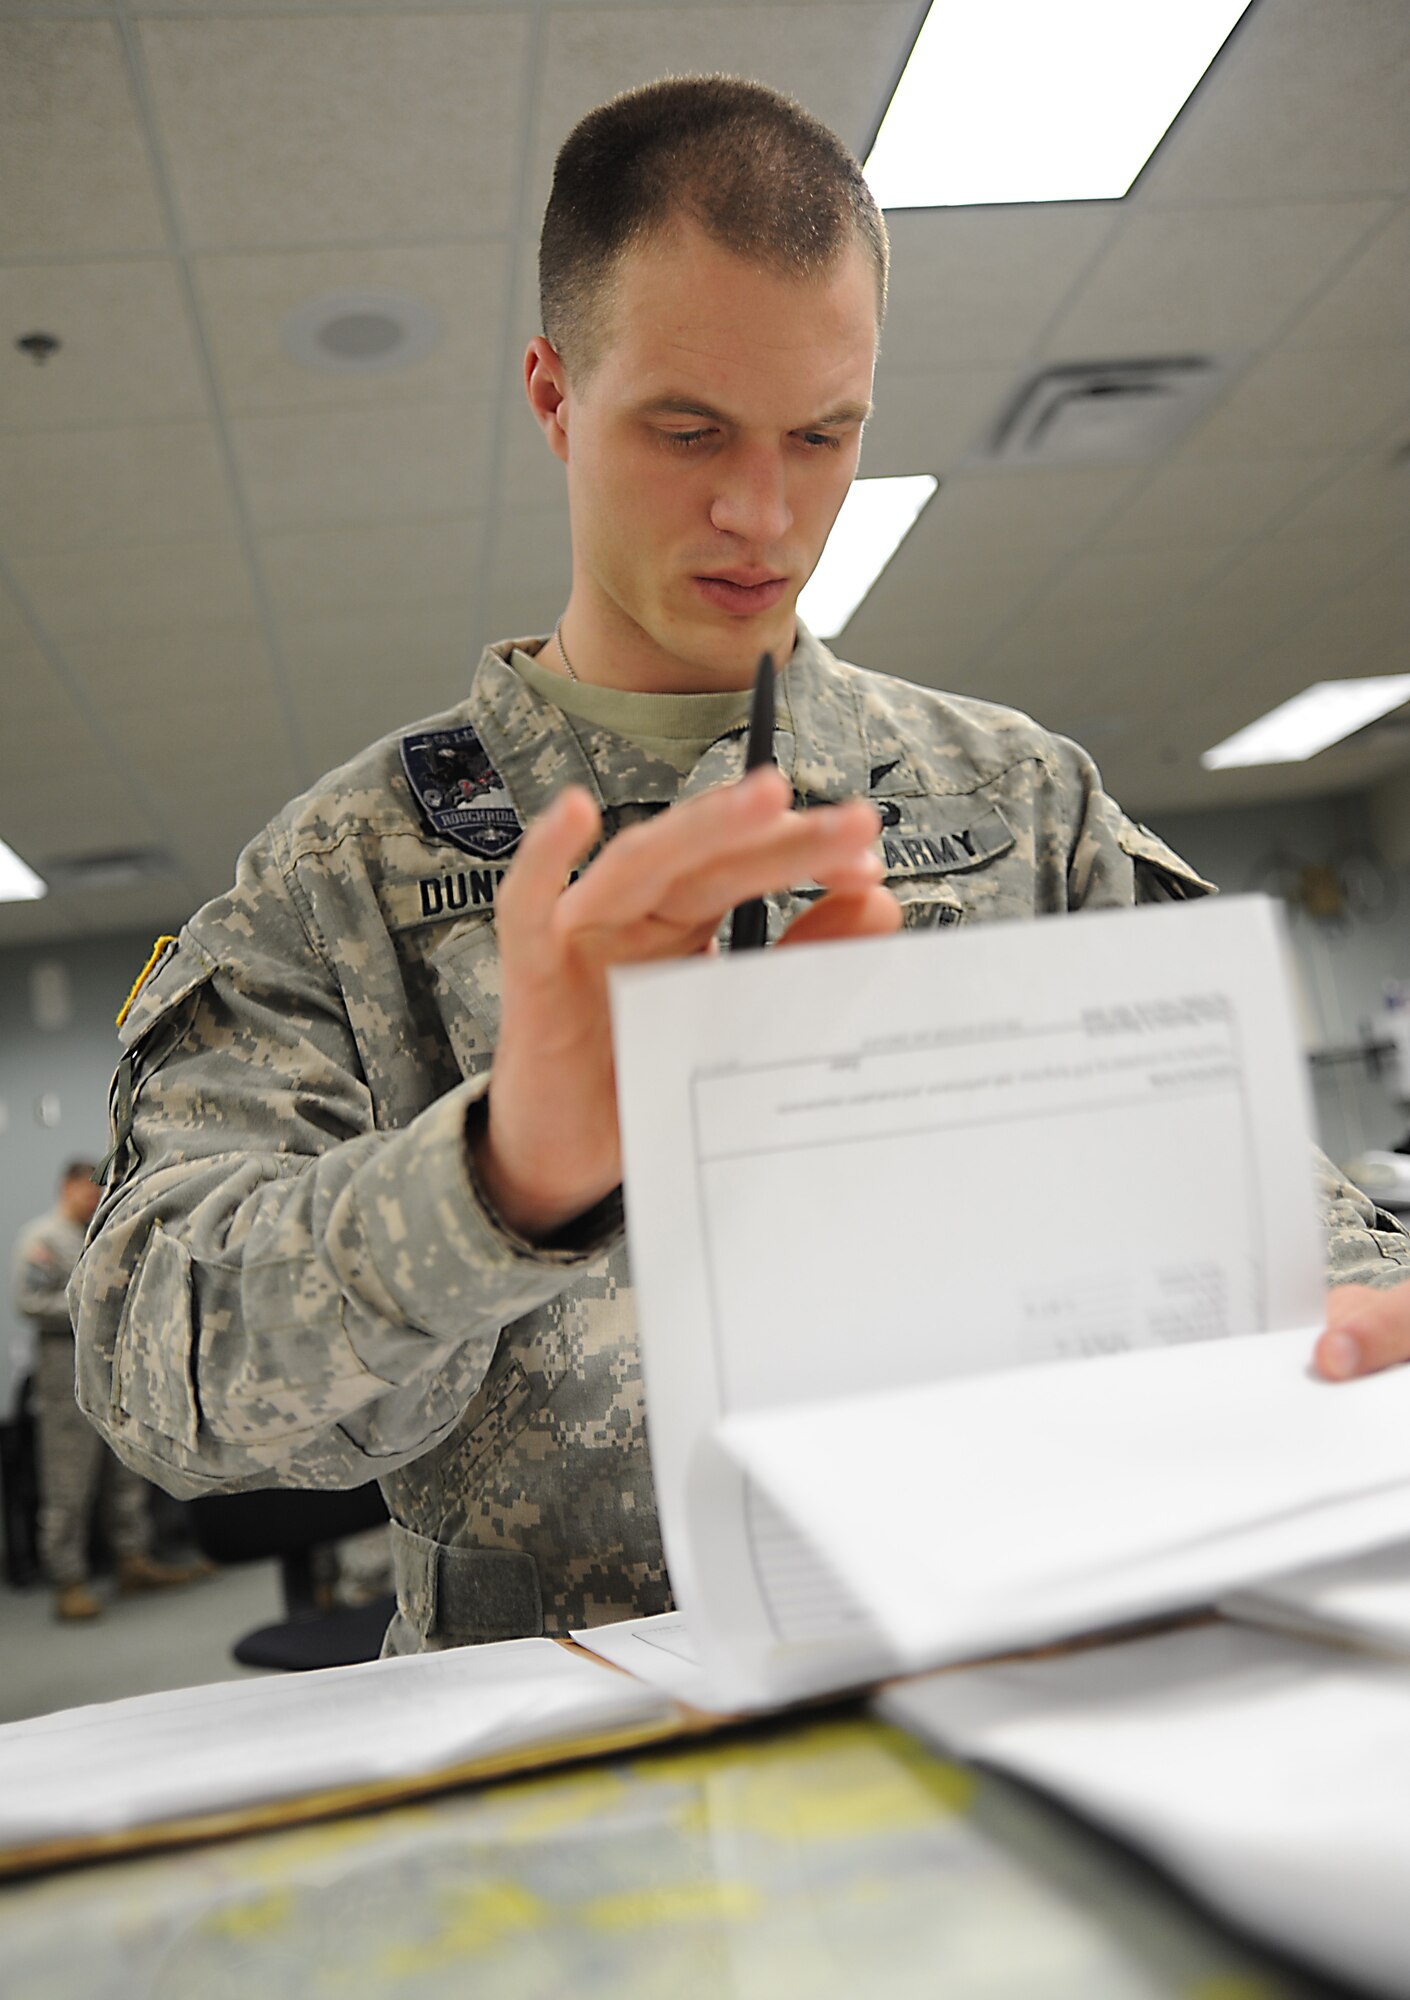 WHITEMAN AIR FORCE BASE, Mo. -- U.S. Army 1st Lt. Caleb Dunham, 1-135th Attack Reconnaissance Battalion platoon leader, reviews training records, Jan. 16. Training records helps pilots identify strengths and weaknesses so they can make improvements during future flights. (U.S. Air Force photo/Staff Sgt. Nick Wilson) (Released)